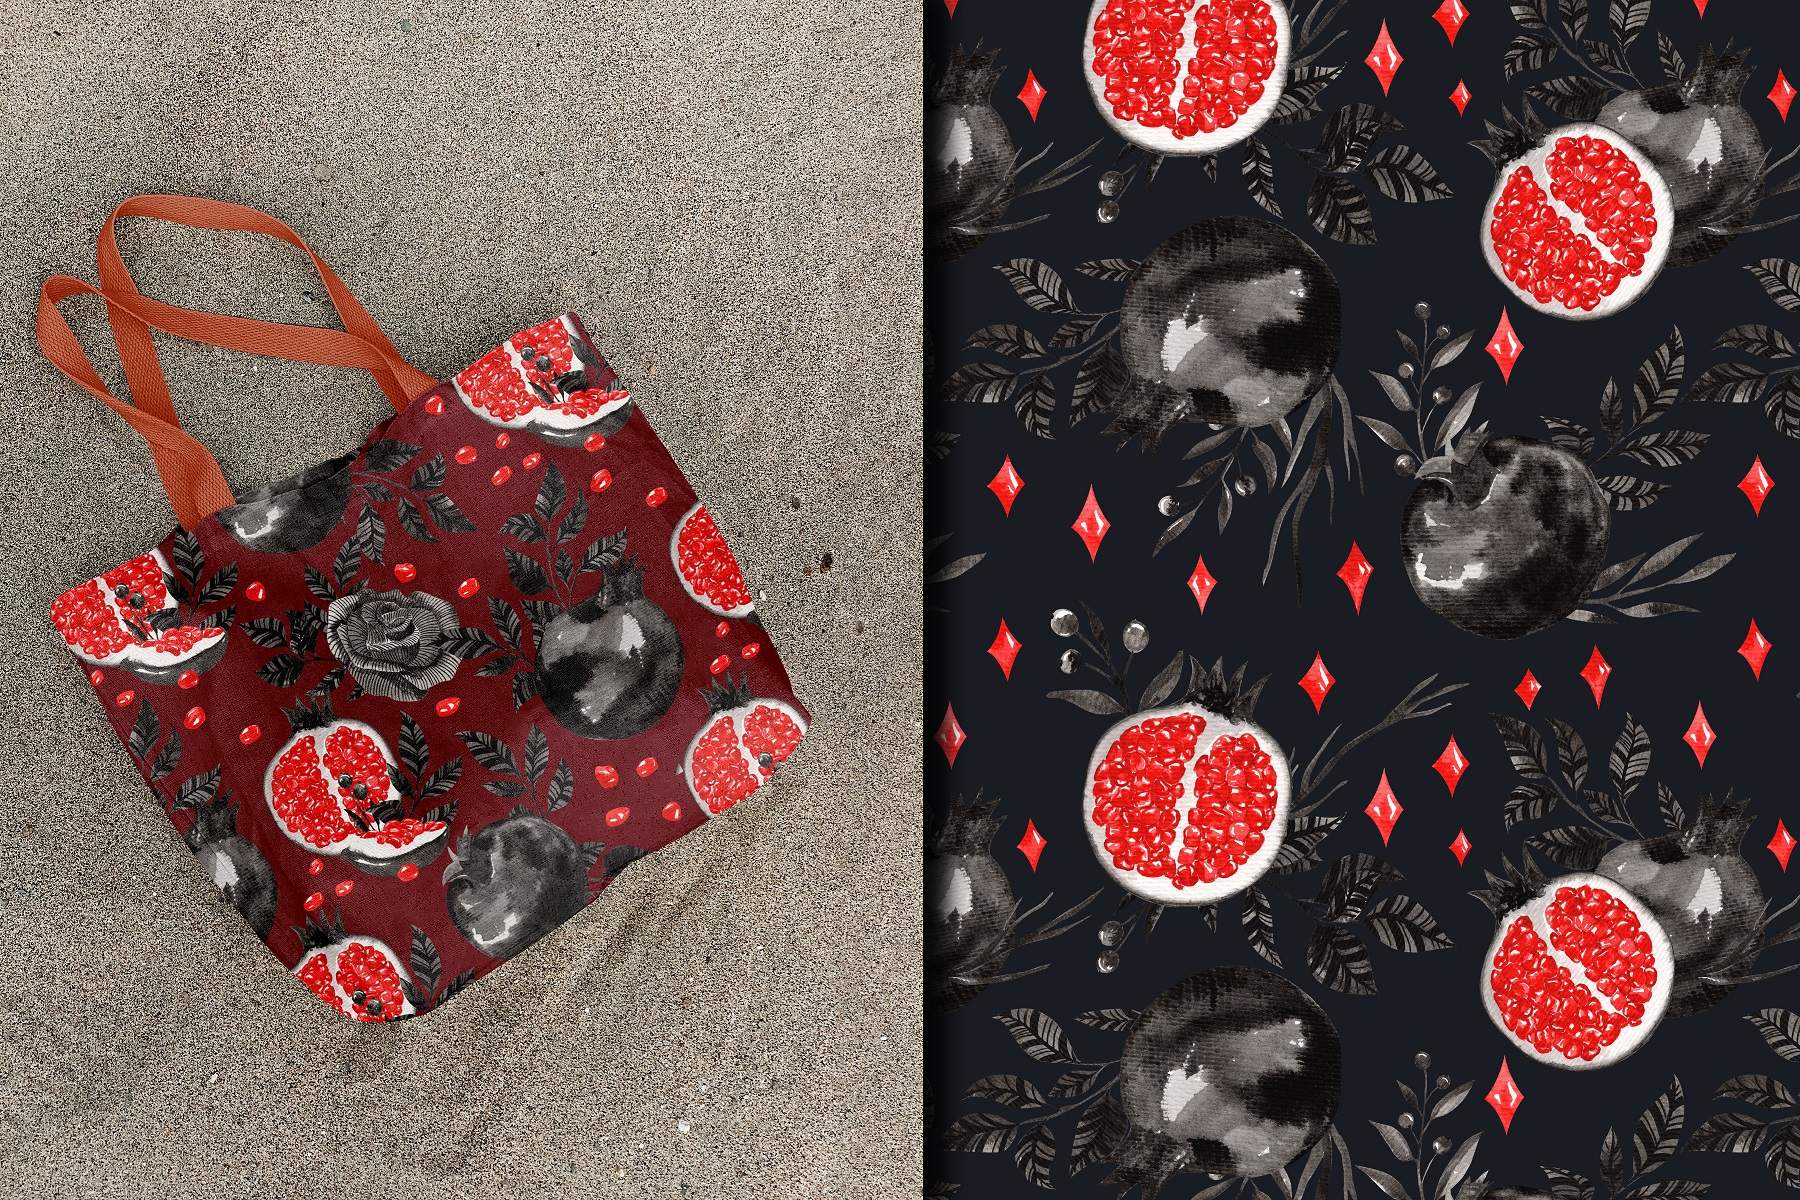 Bag with a pomegranate pattern and a picture of a pome.